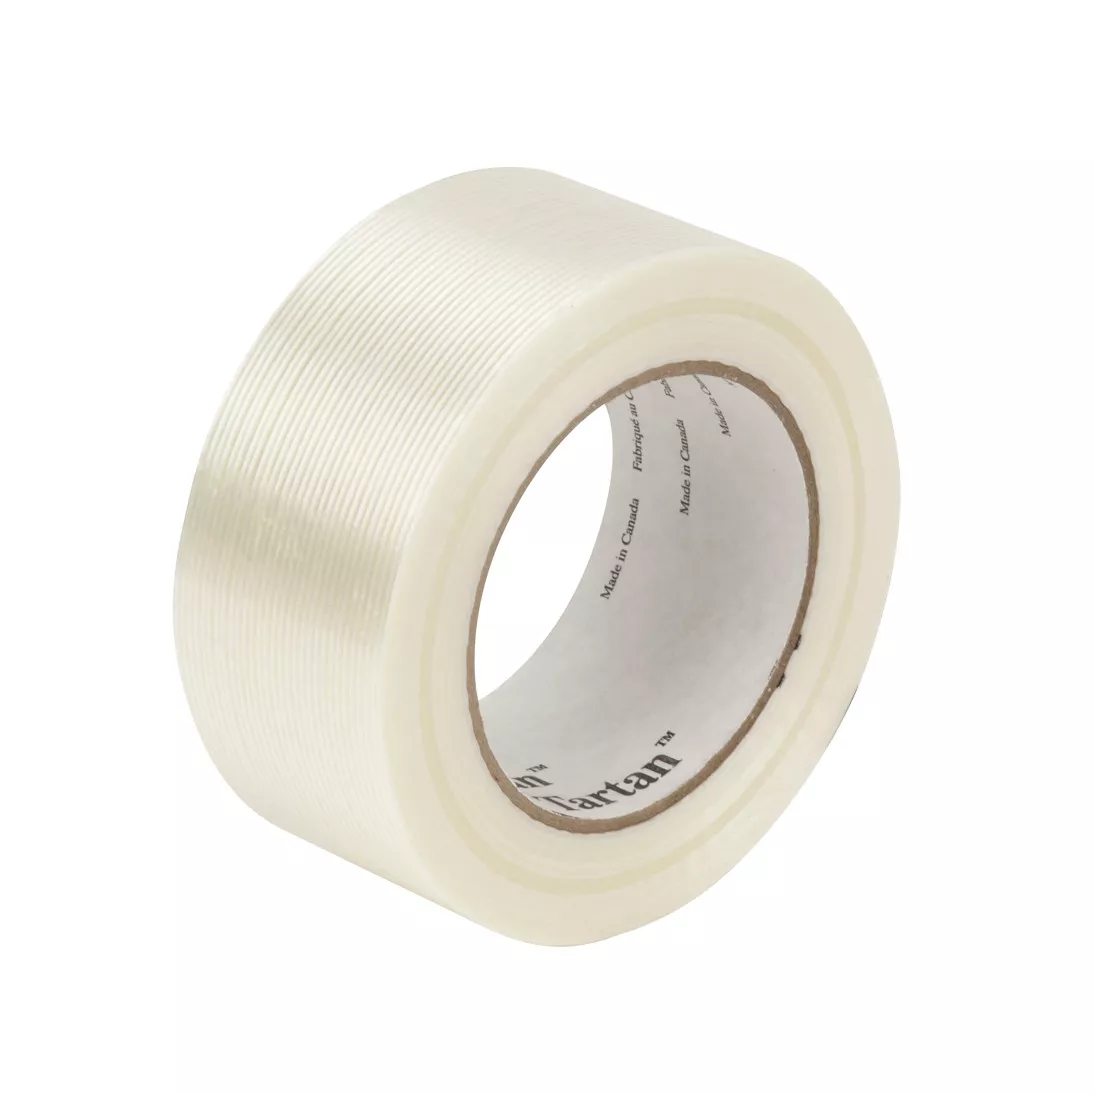 Tartan™ Filament Tape 8934, Clear, 48 mm x 55 m, 4 mil, 24 rolls per
case, Individually Wrapped Conveniently Packaged